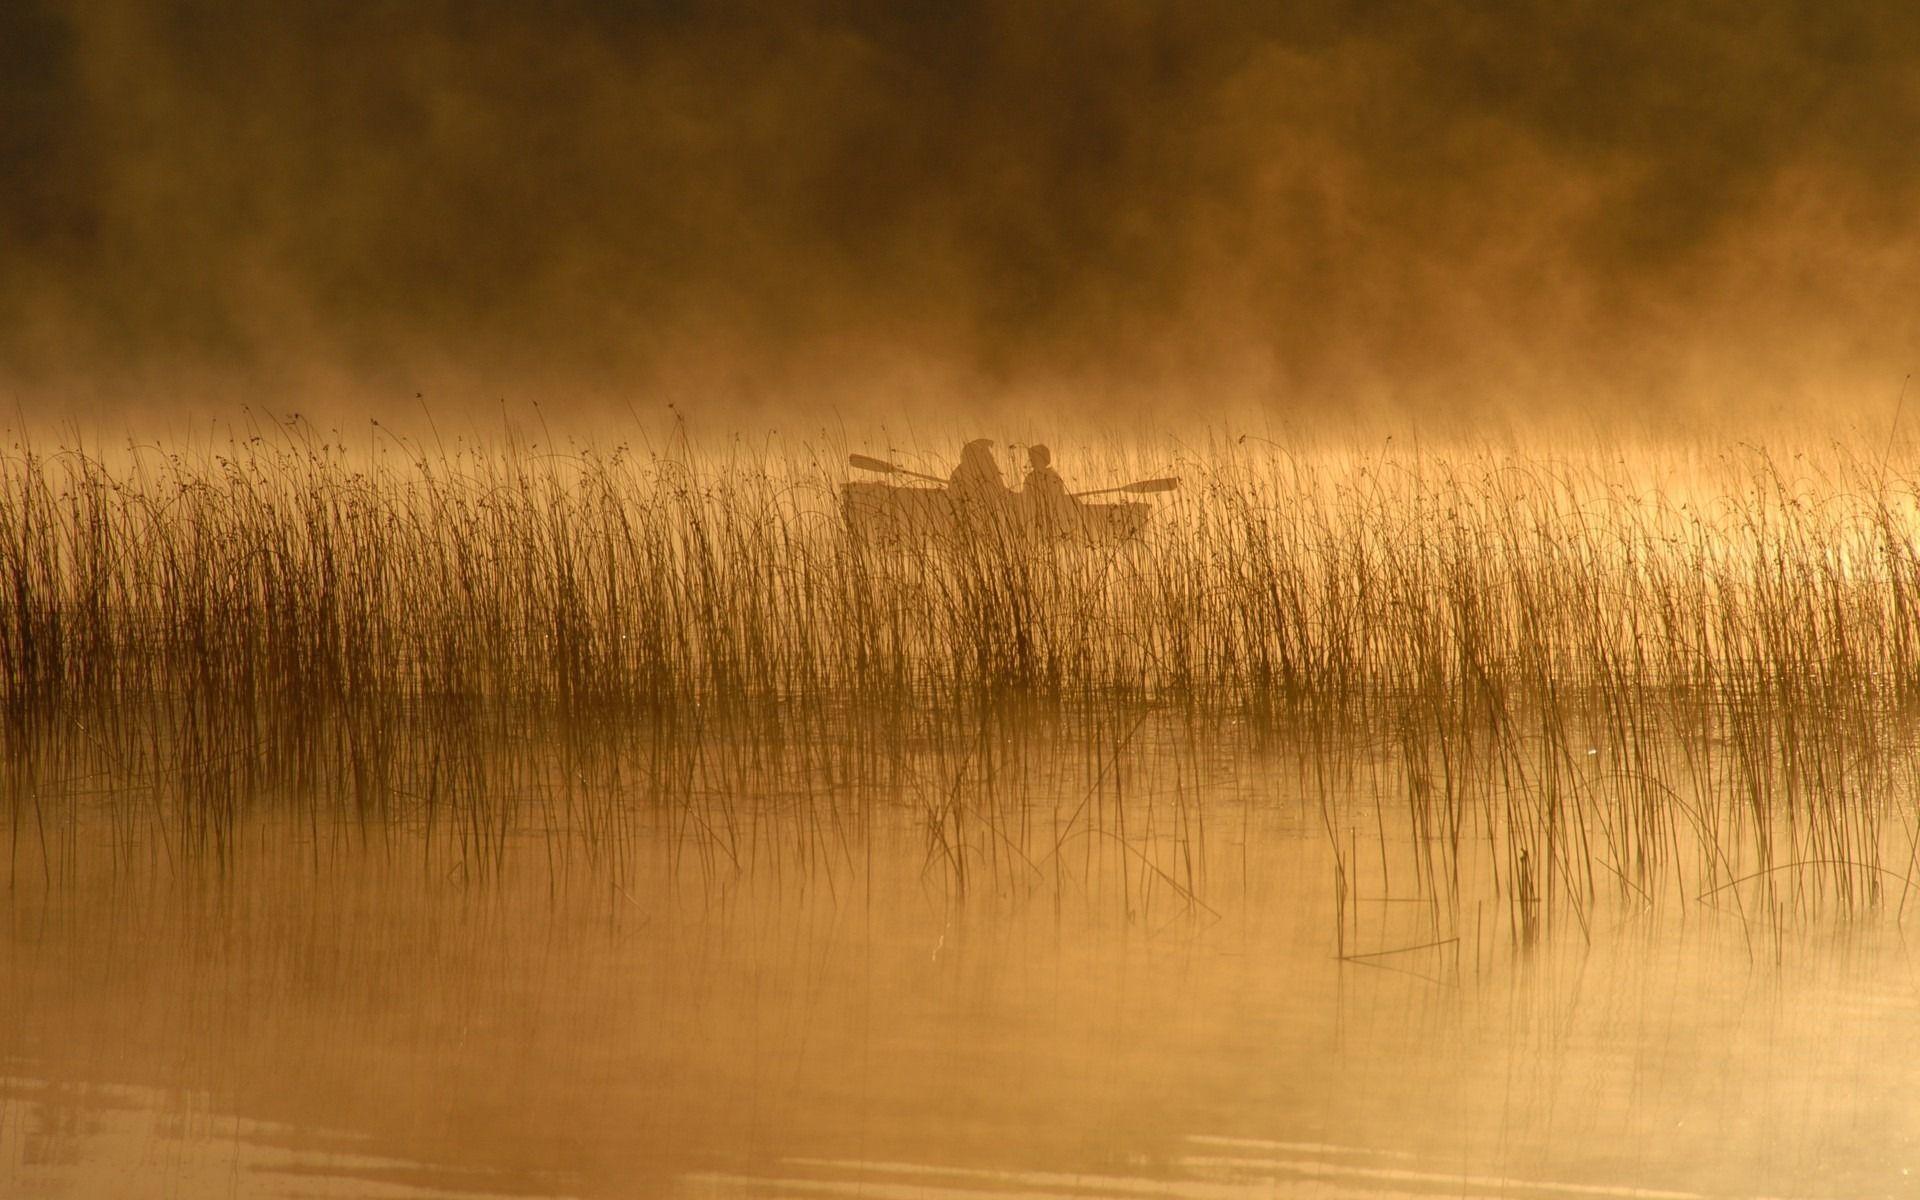 The Image of Silhouette Ships Sepia Swamp 1920x1200 HD Wallpaper